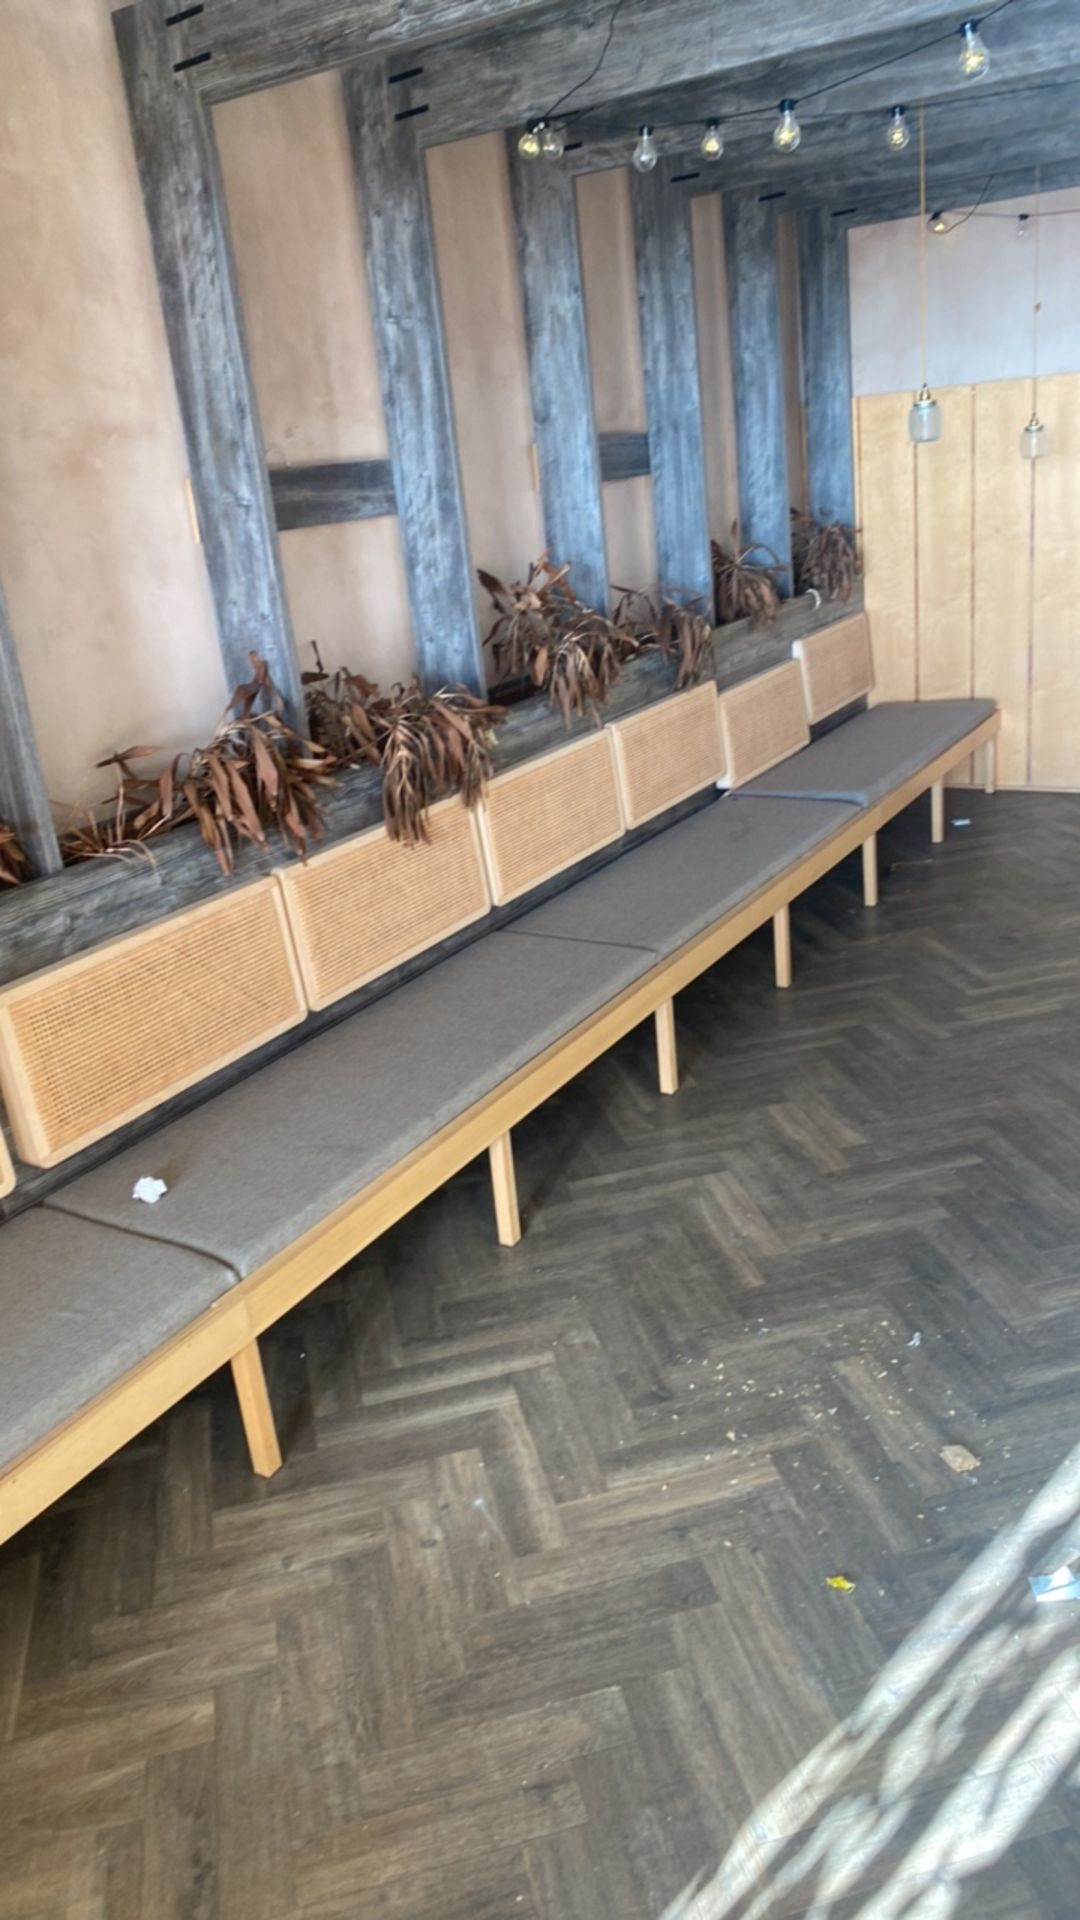 Restaurant Seating Area - Image 4 of 5